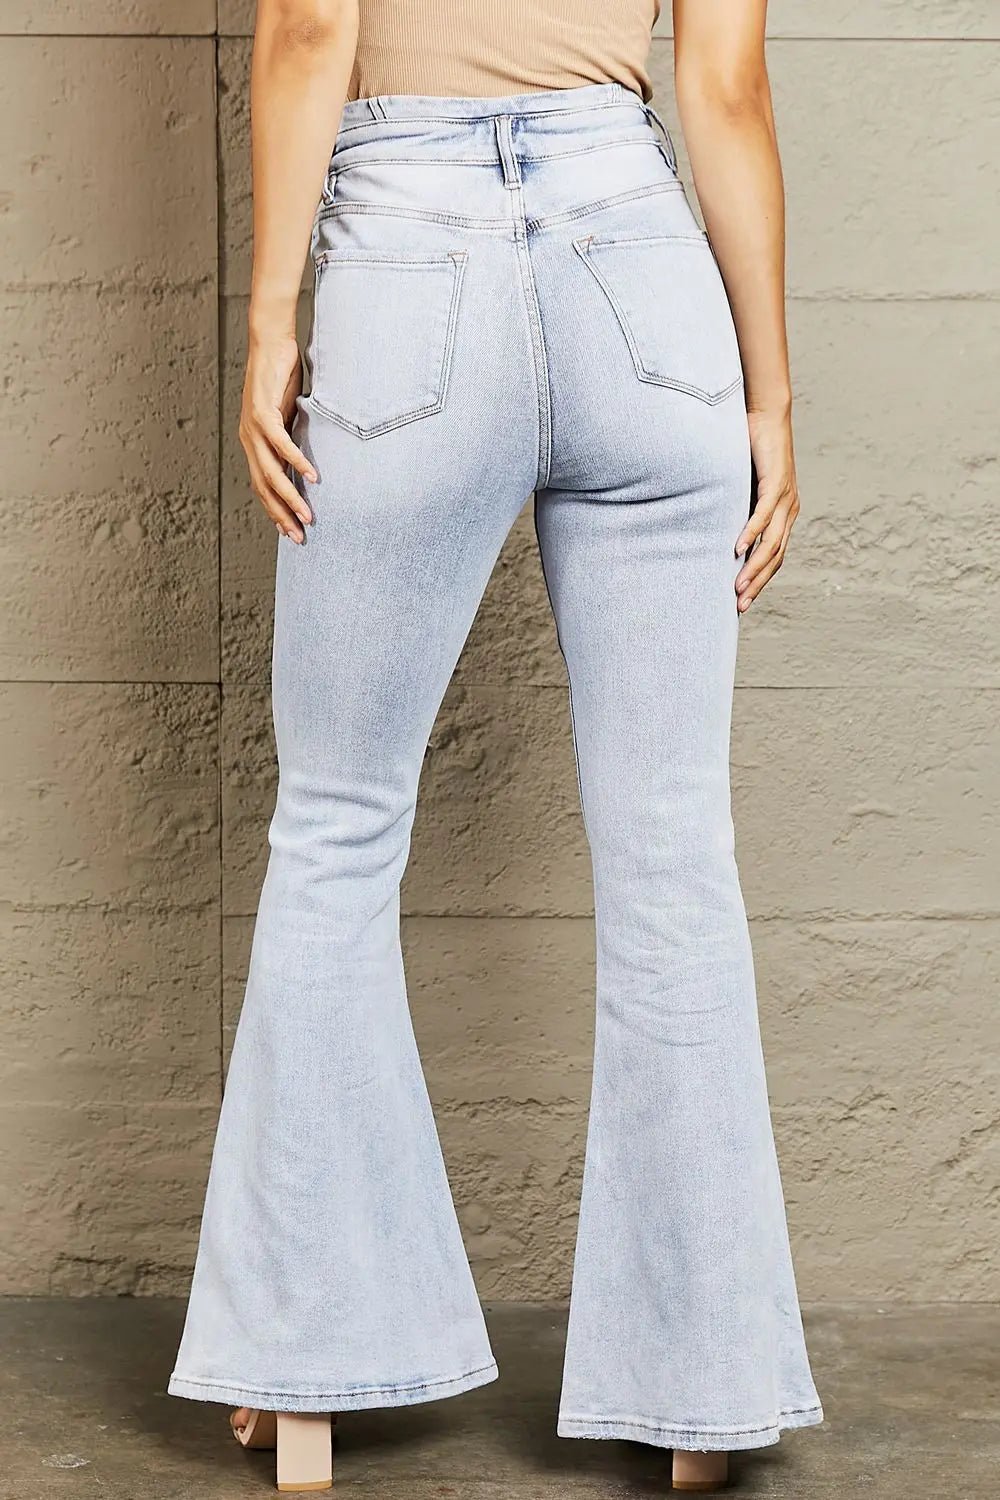 WOMEN'S HIGH WAISTED RETRO FLARE JEANS - MeadeuxWOMEN'S HIGH WAISTED RETRO FLARE JEANSJeansMeadeux